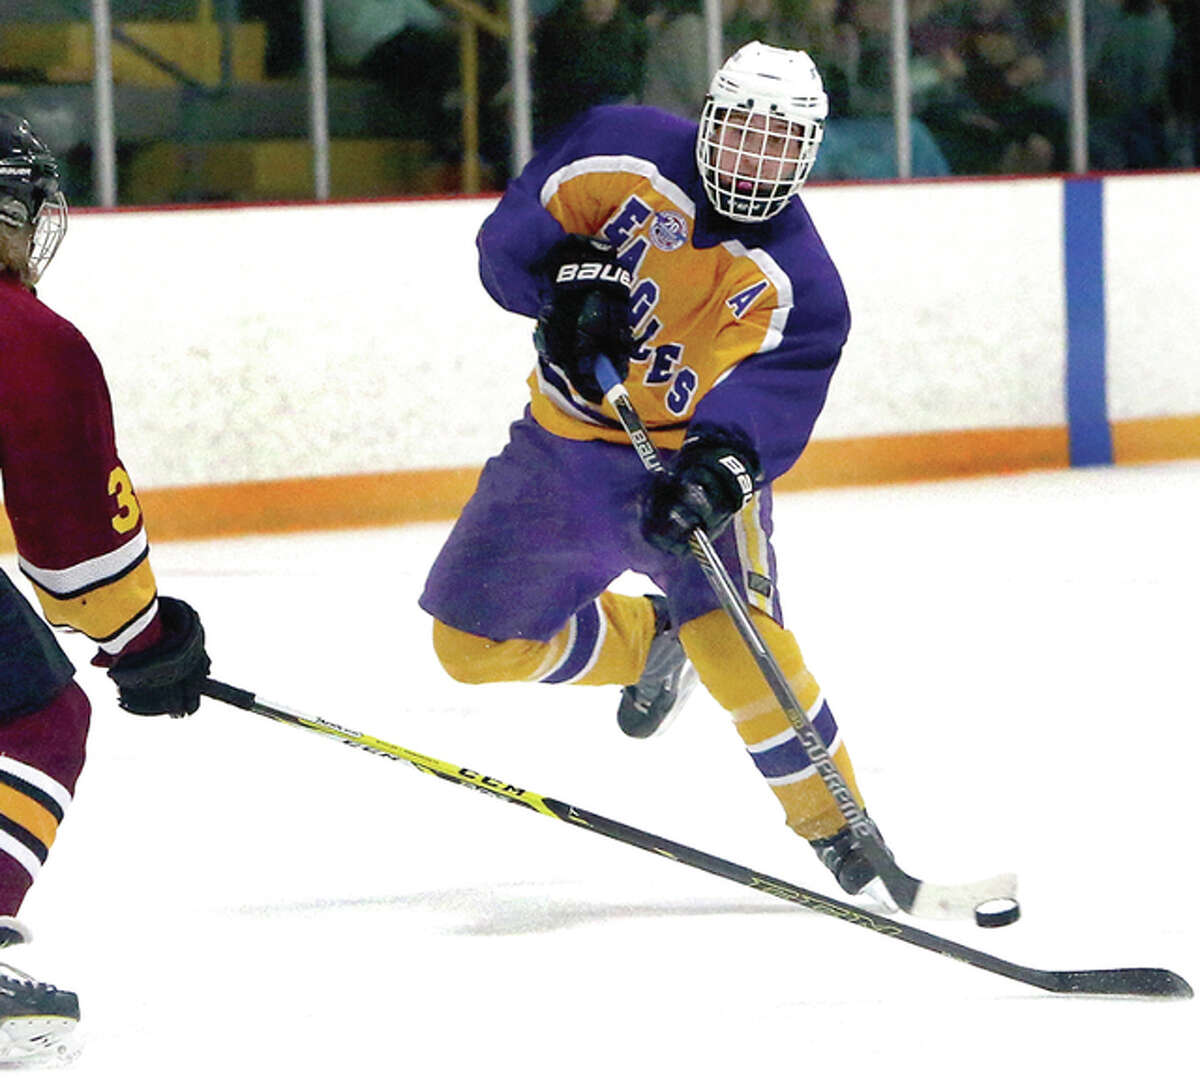 Jayden Kahl scored five goals and addded an assst form the Bethalto Eagles in their 11-4 victory over Highland Tuesday night at the East Alton Ice Arena.